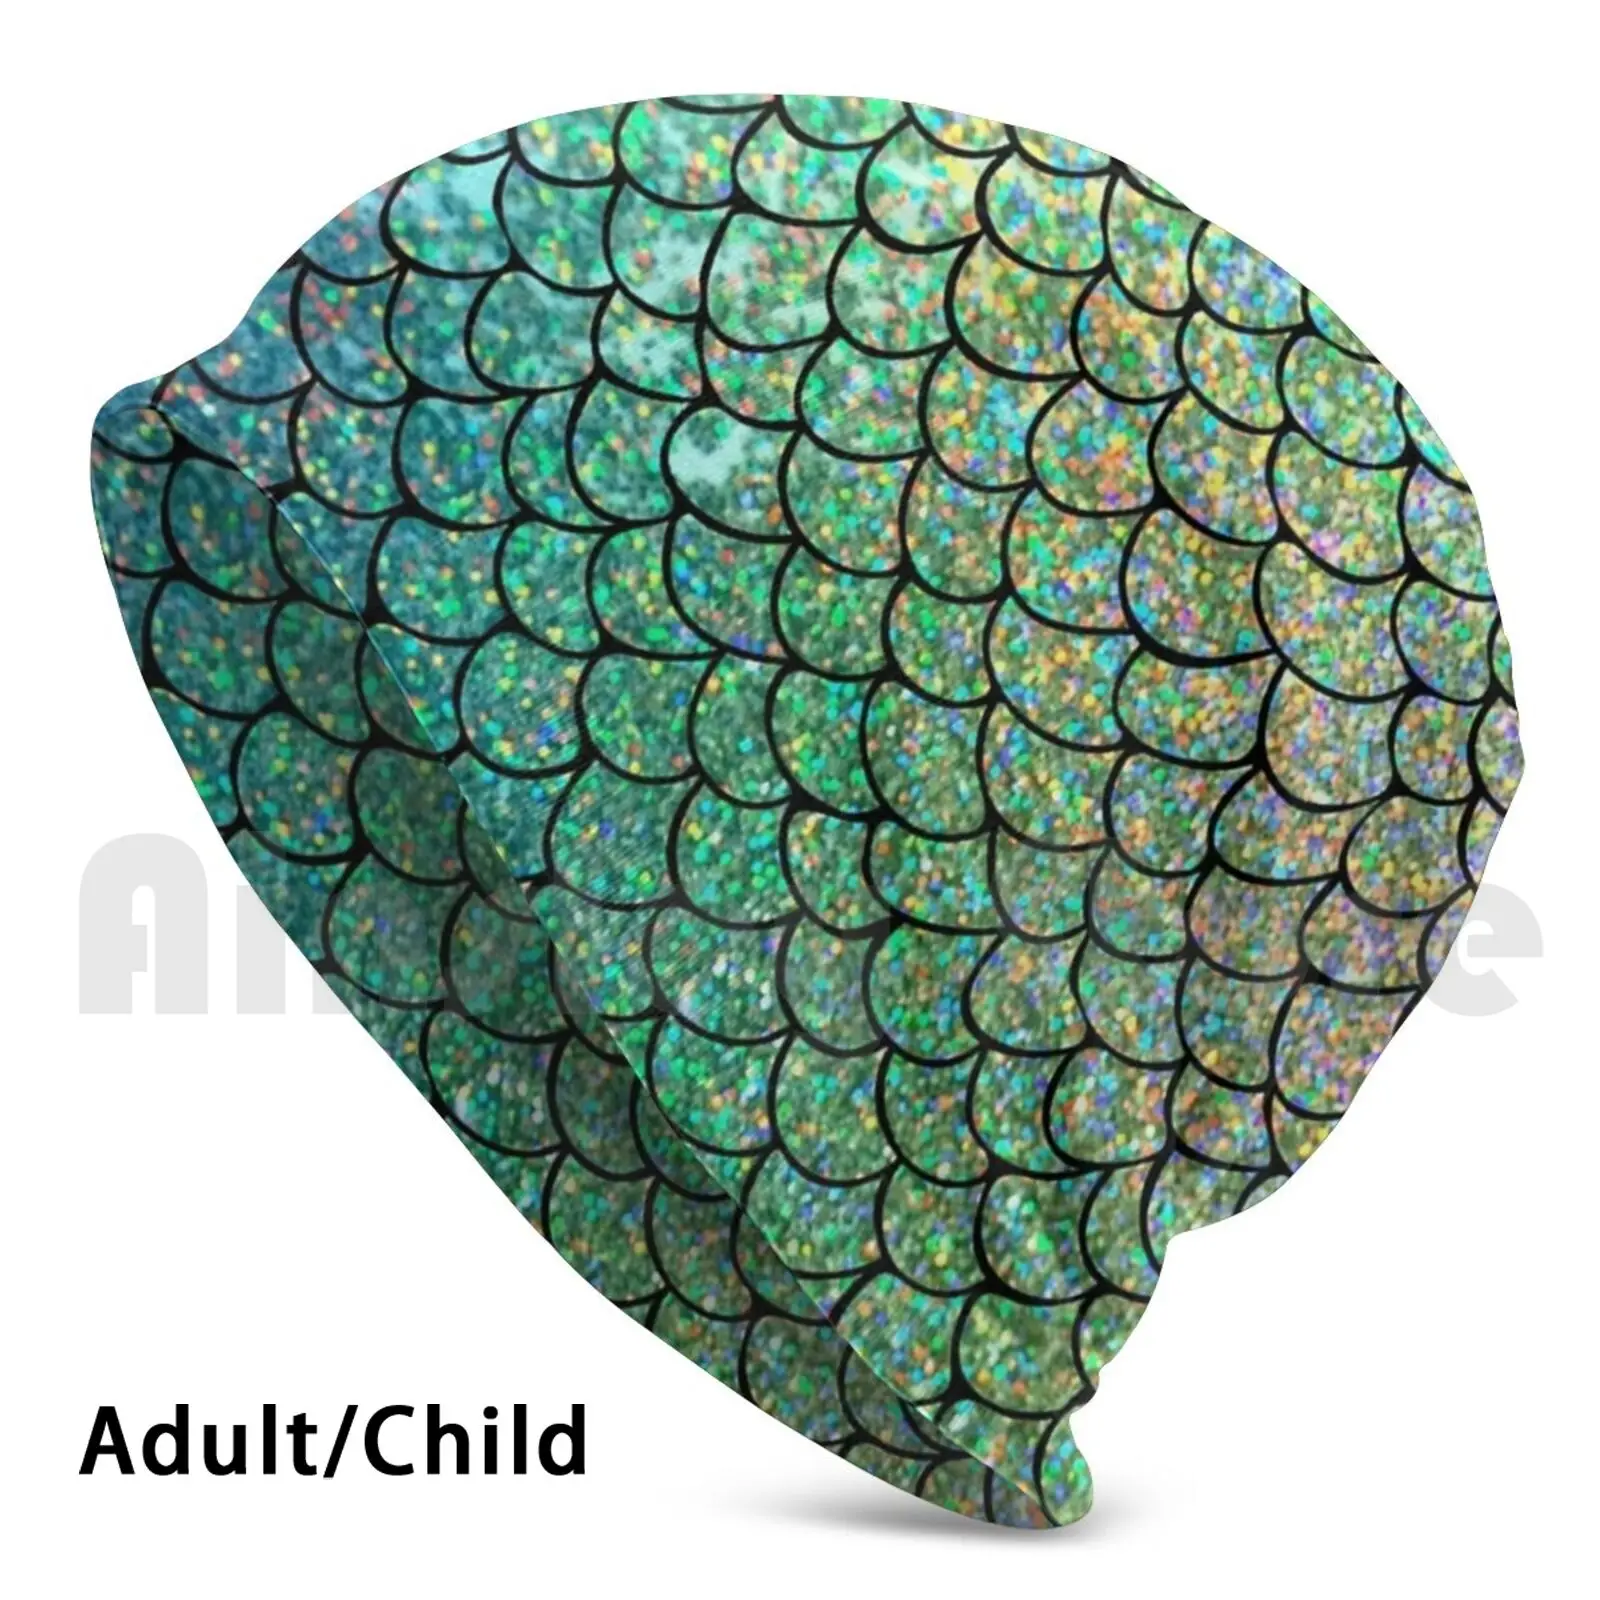 

Colorful Glitter Mermaid Scales Beanies Knit Hat Hip Hop Mermaid Fairy Tale Scale Scales Whale Tail Animal Arctic